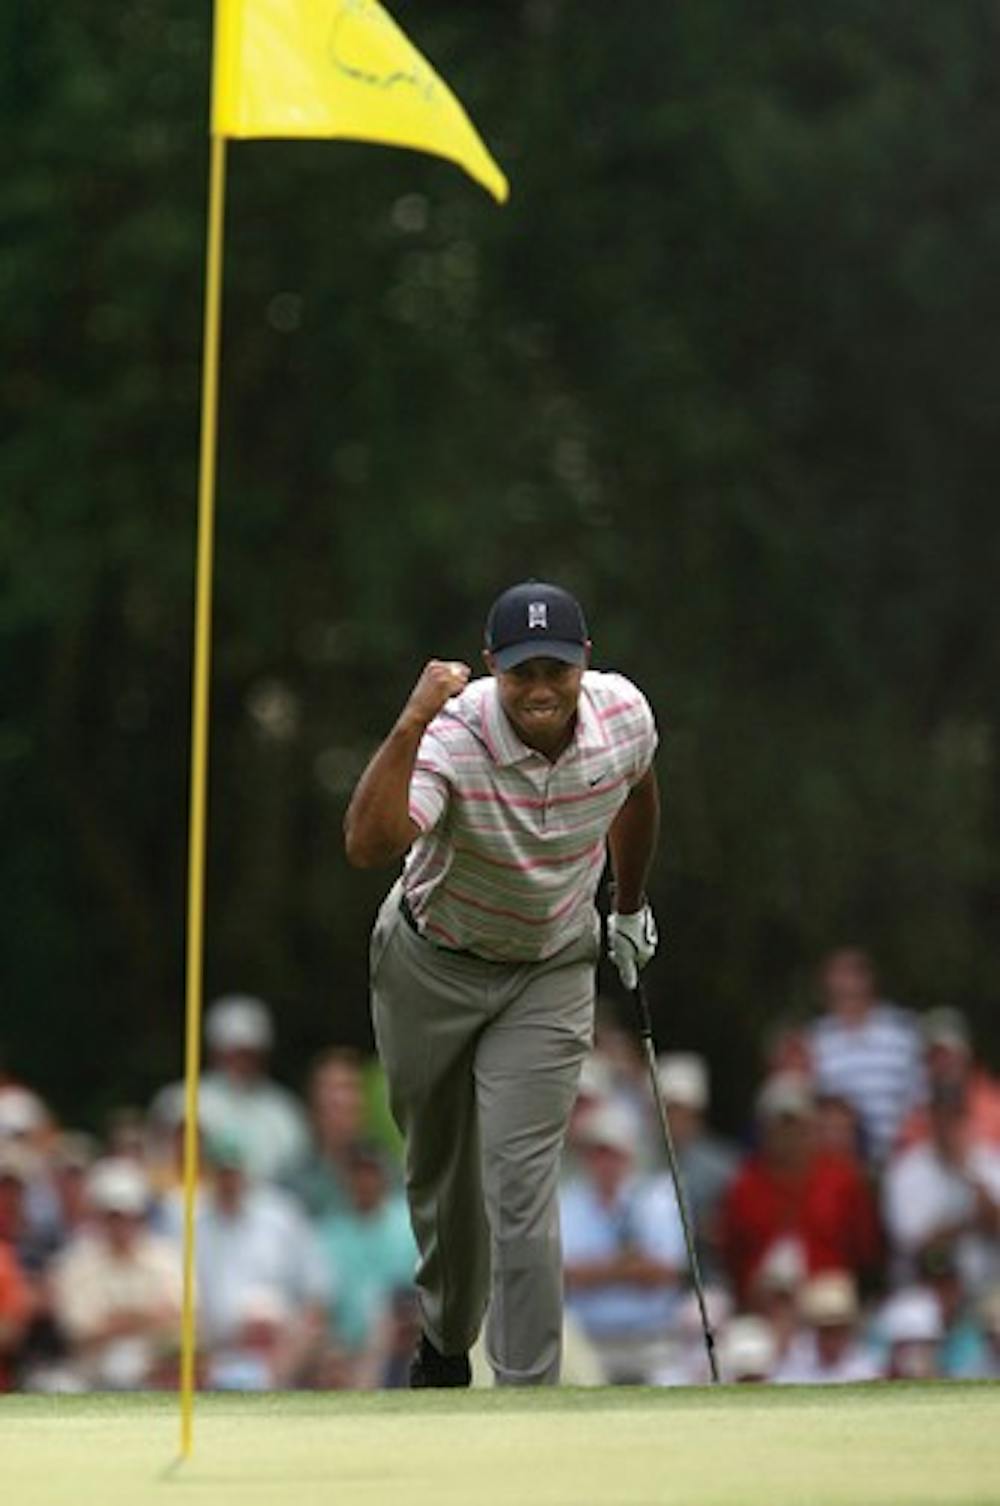 Tiger Woods pumps his fist as his ball goes in for an eagle on the 15th hole during the first round of the 2008 Masters golf tournament at the Augusta National Golf Club Thursday in Augusta, Ga. (AP Photo/Atlanta Journal-Constitution, Jason Getz) ** MARIETTA DAILY OUT, GWINNETT DAILY POST OUT **